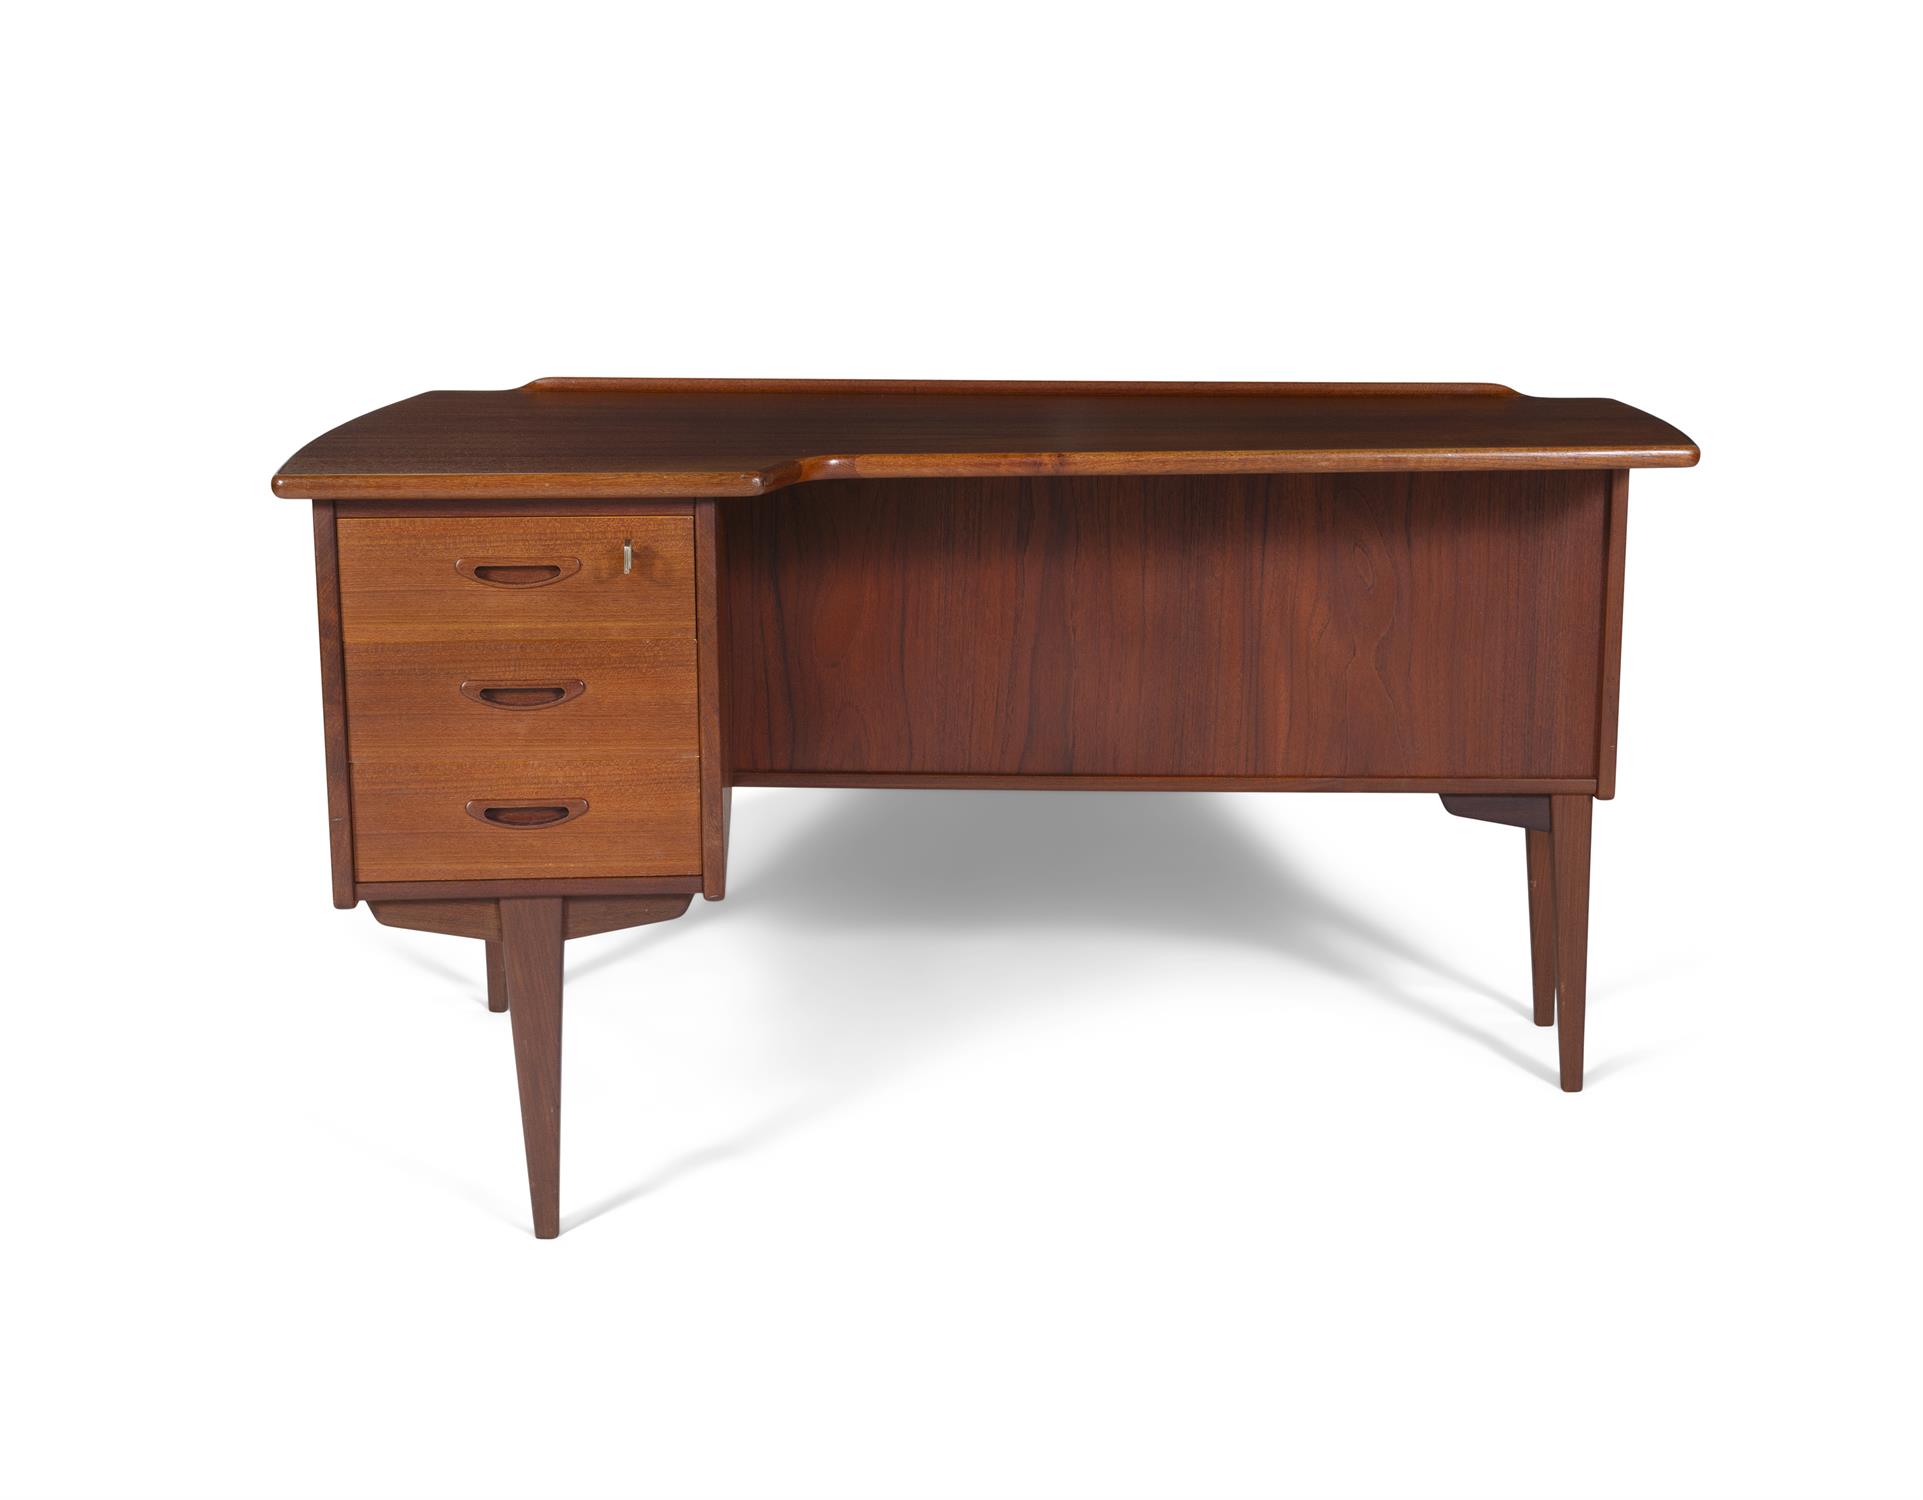 DESK A teak boomerang desk with three drawers and one drop down door with maker's label. Sweden, - Image 2 of 10